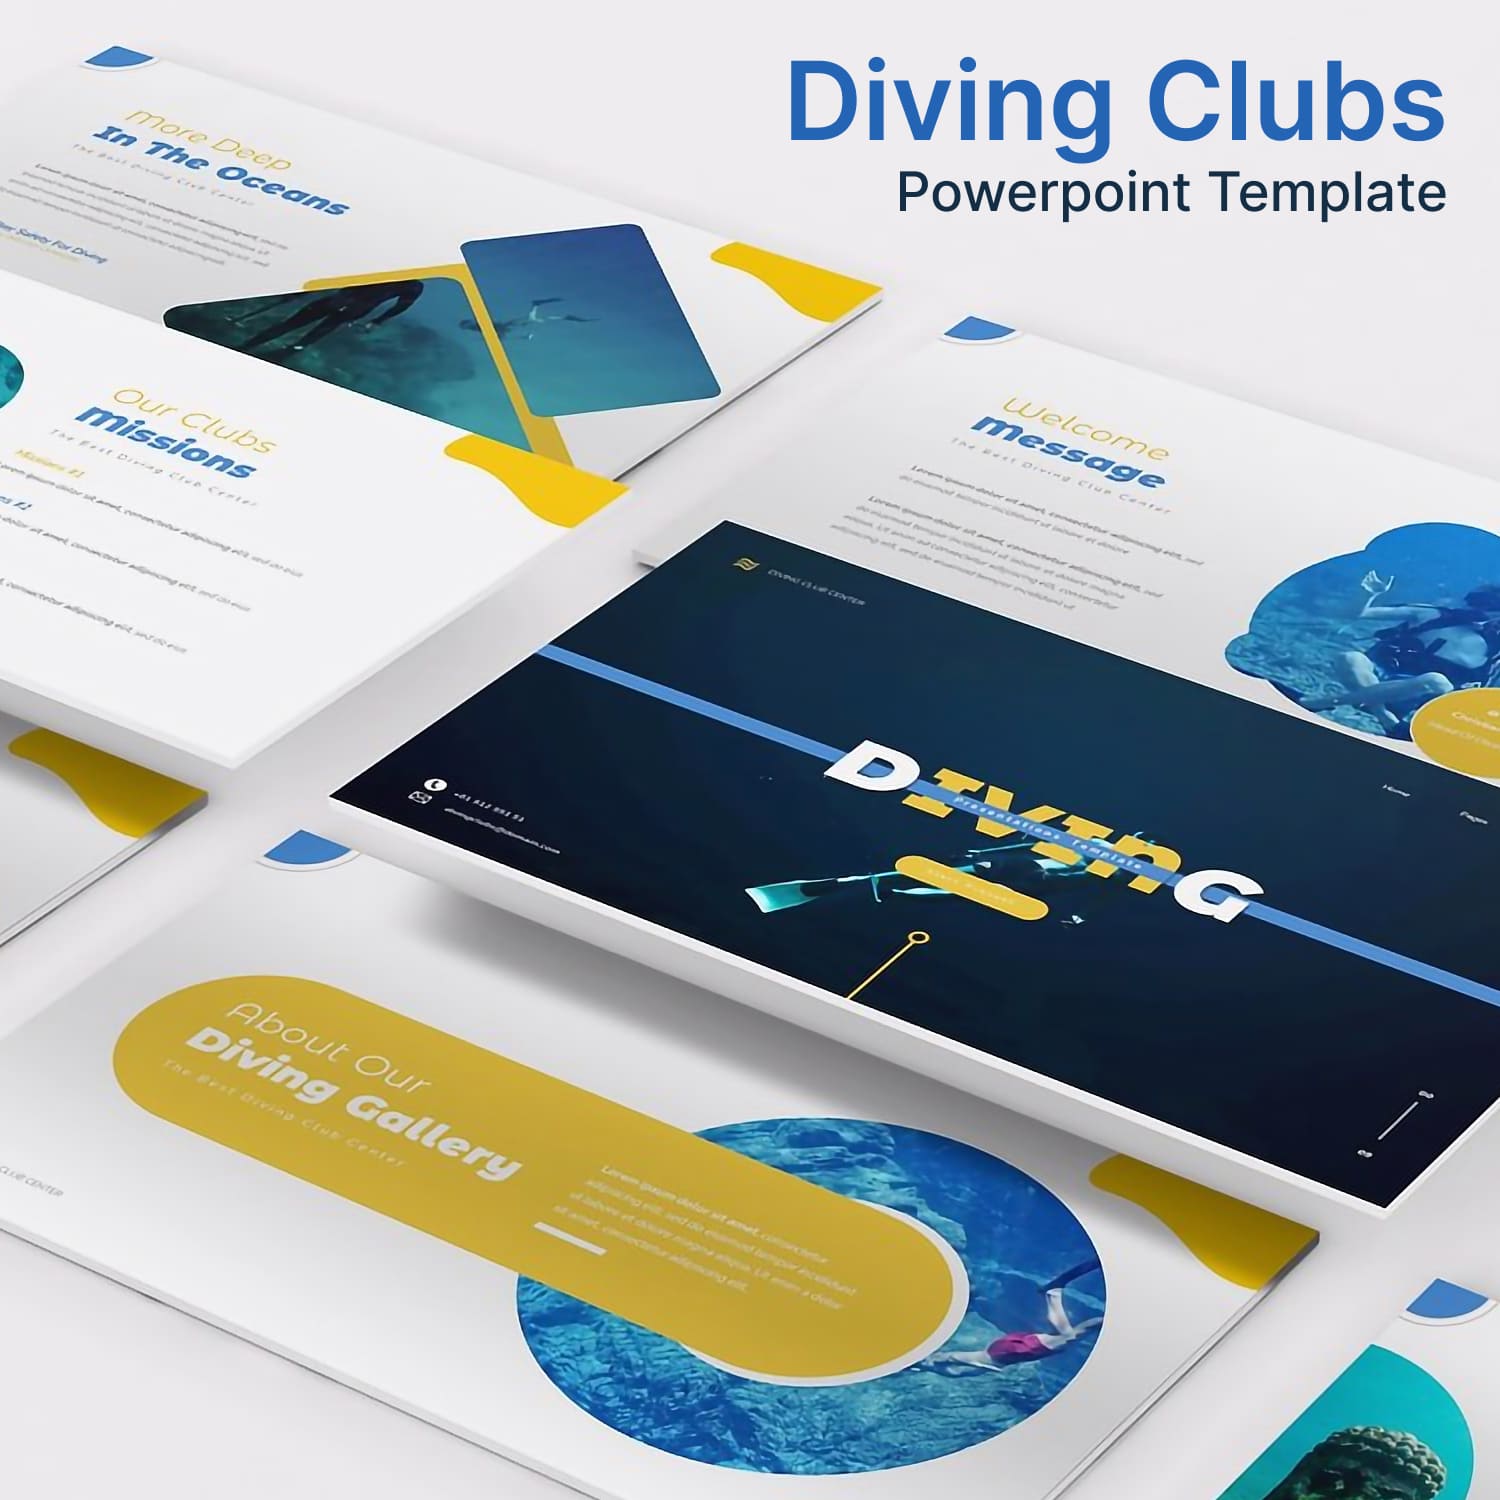 Diving Clubs Powerpoint Template.